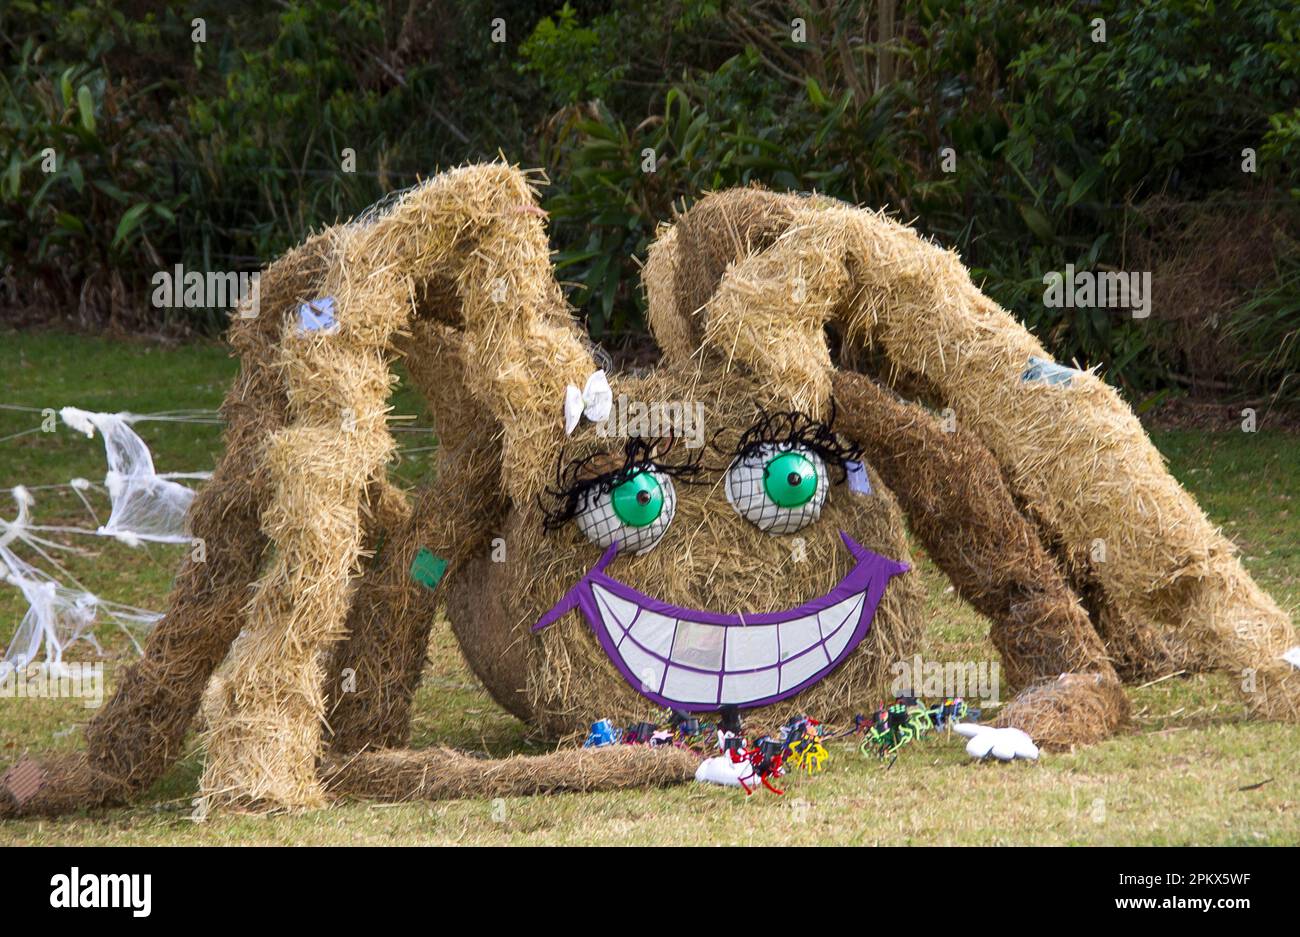 Huge grinning scarecrow in form of a spider made from hay bales. Tamborine Mountain Scarecrow Festival, 2013, Queensland, Australia. Big green eyes. Stock Photo